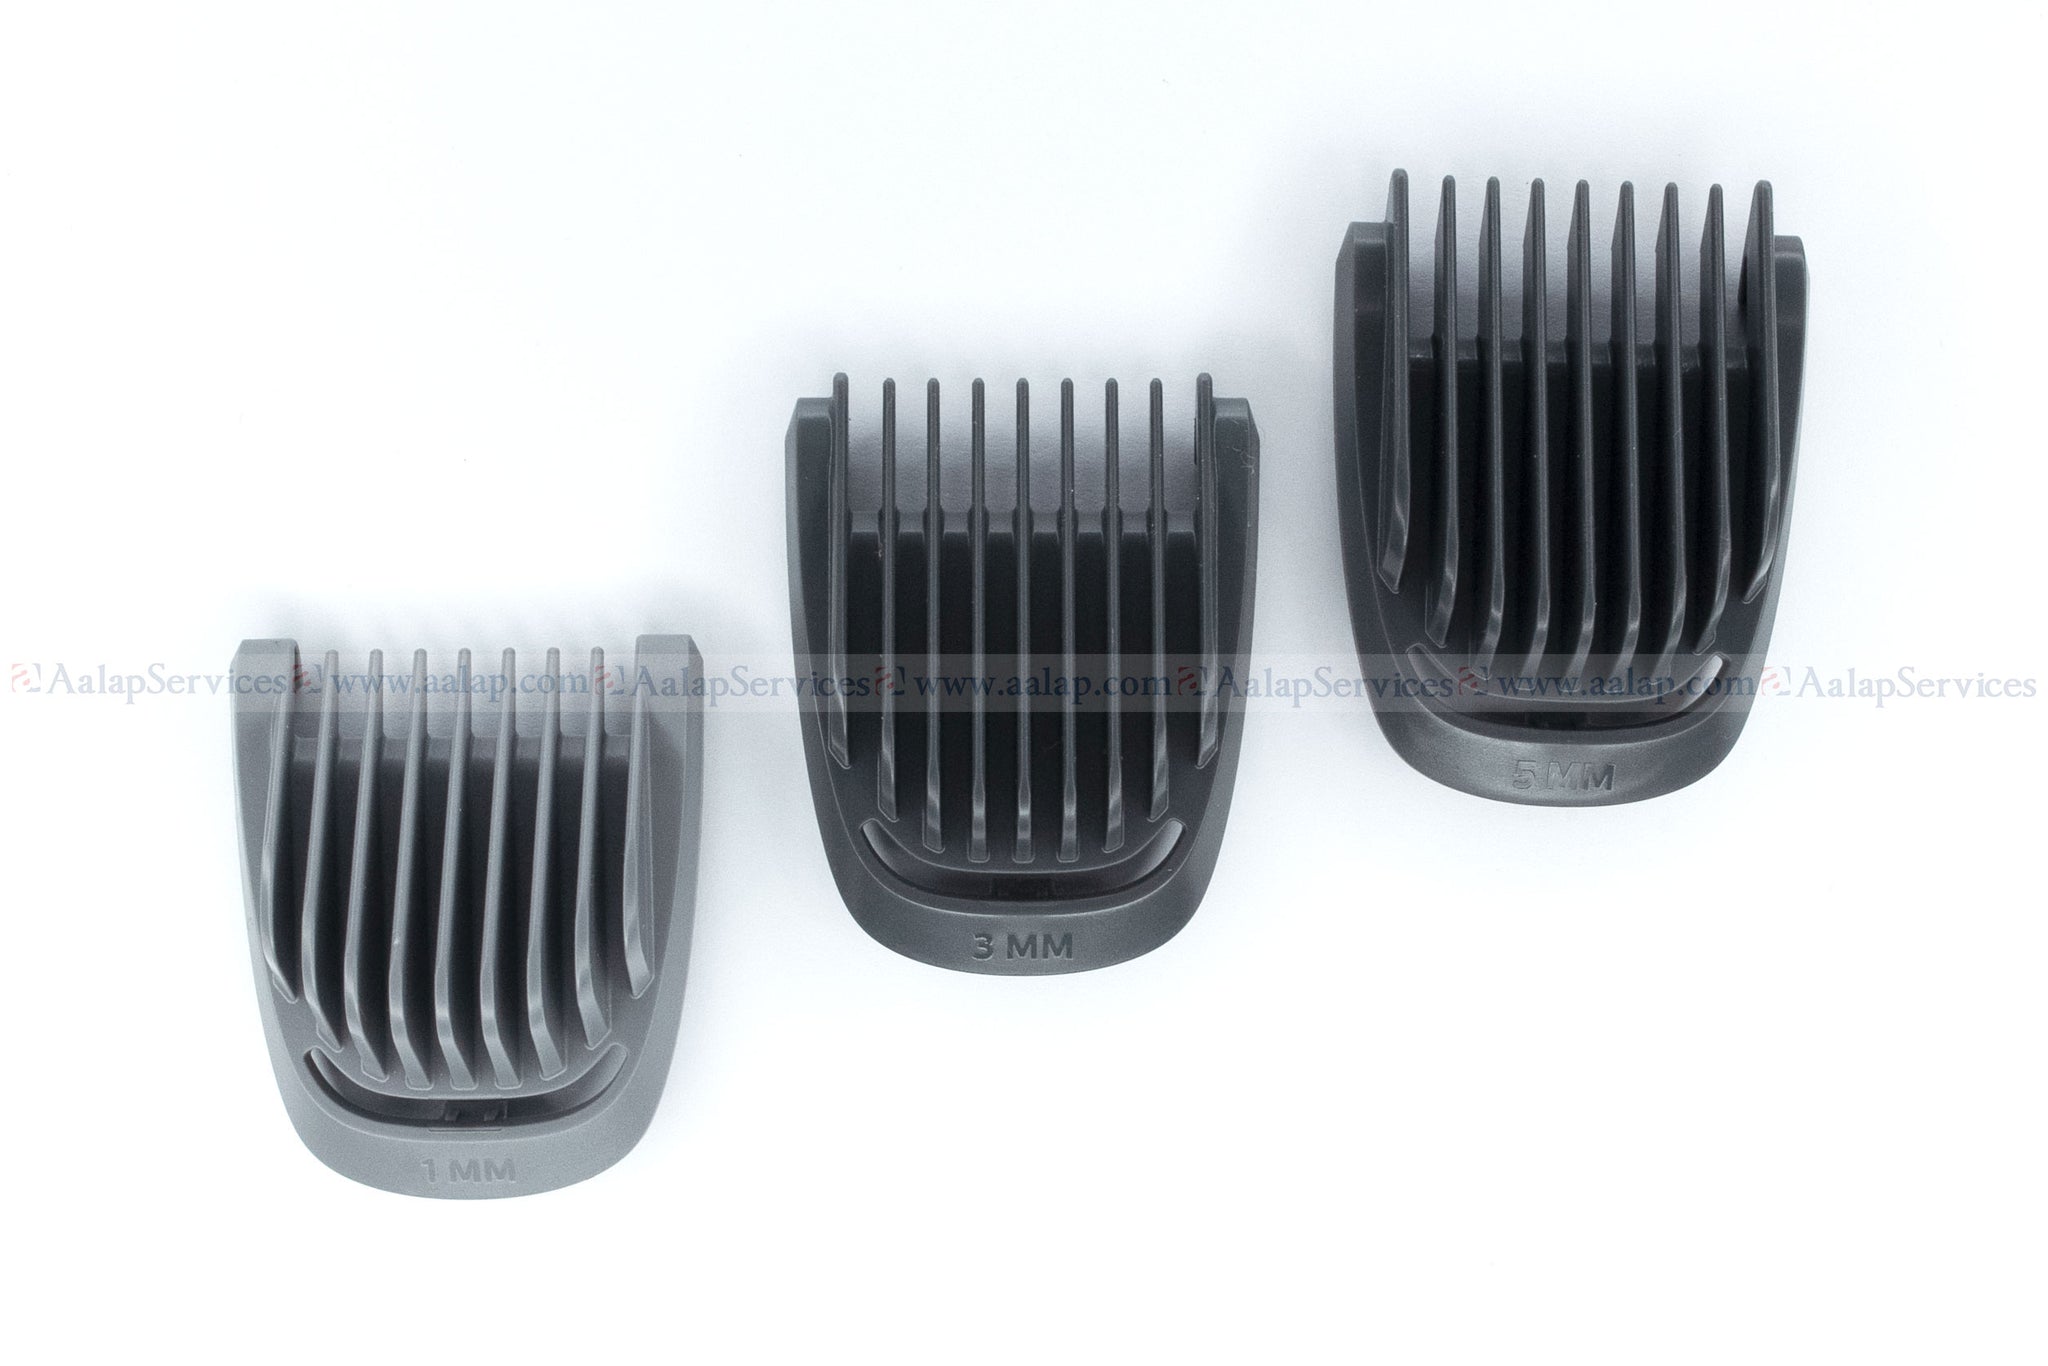 philips trimmer 3mm comb